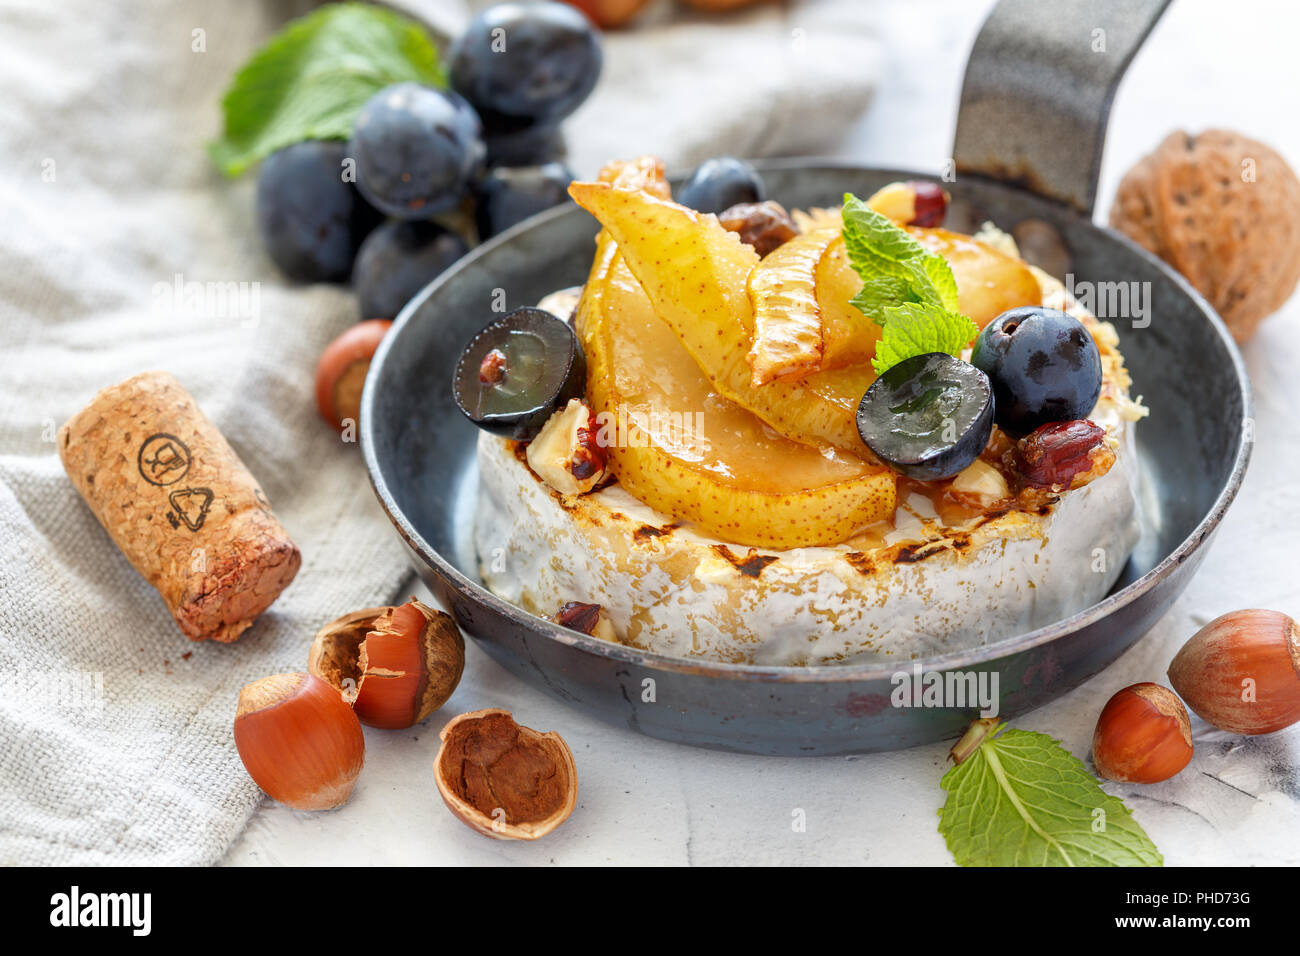 Grilled camembert with pears and black grapes. Stock Photo